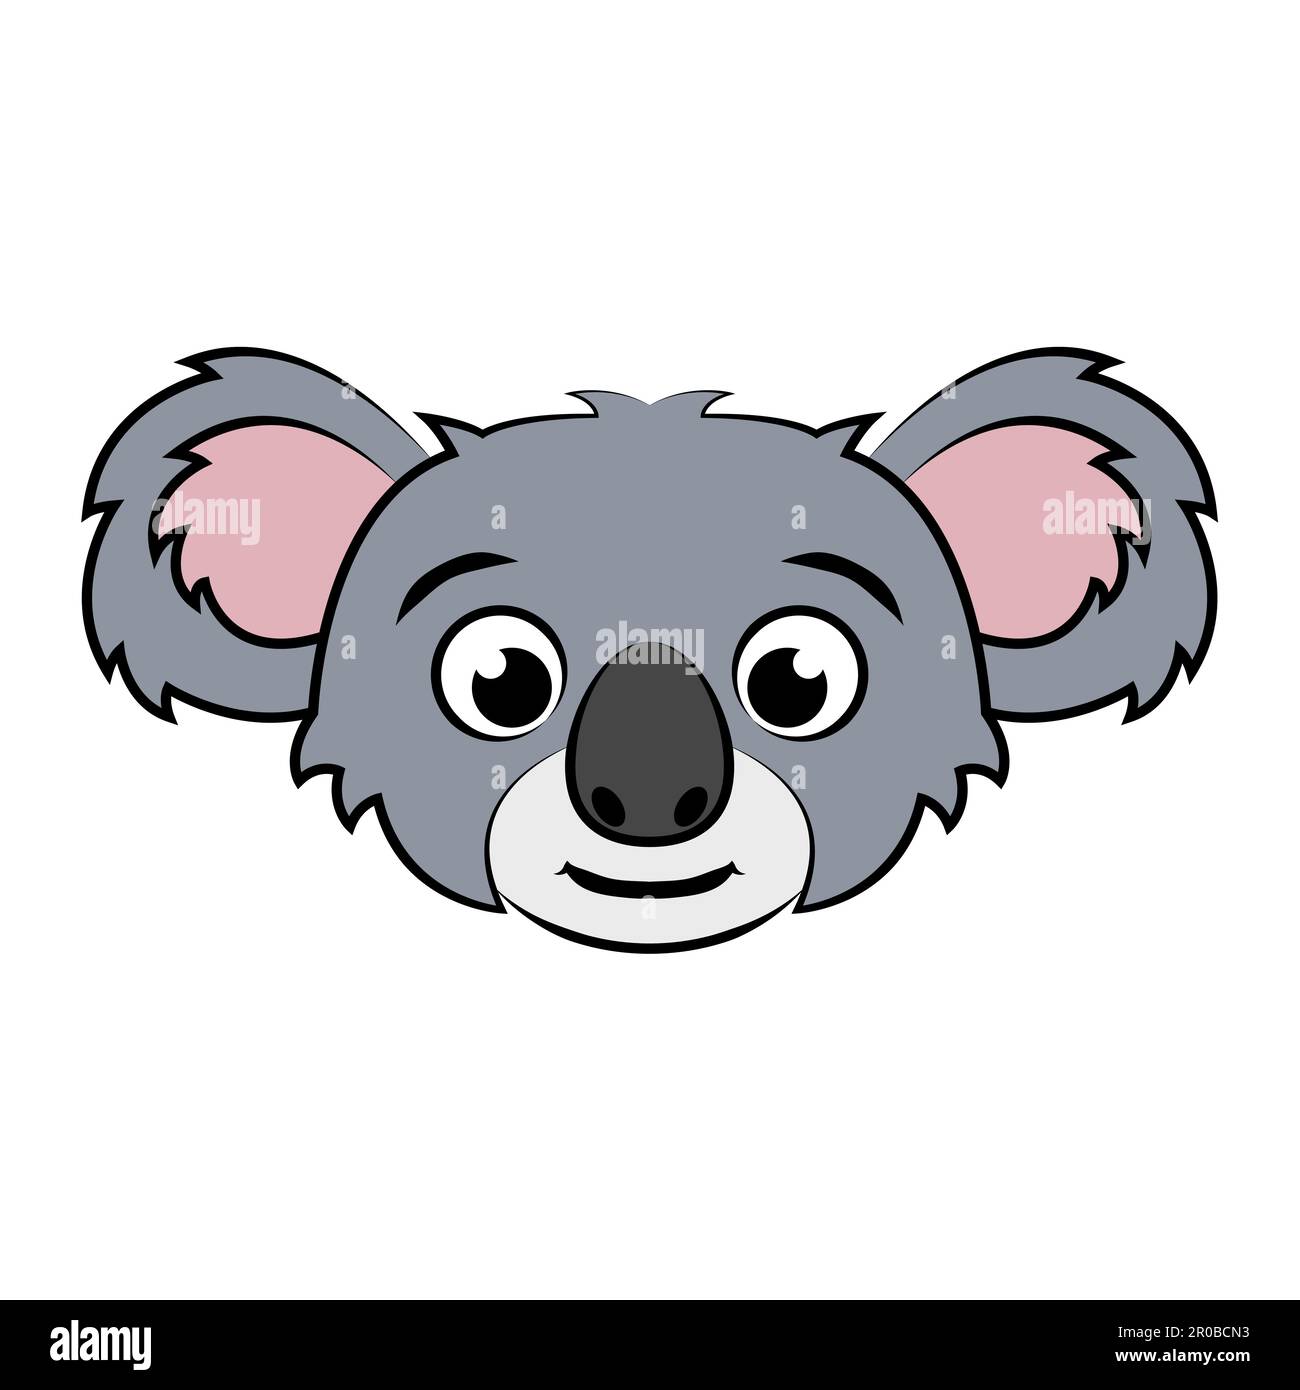 Premium Photo  There is a koala bear with a colorful background